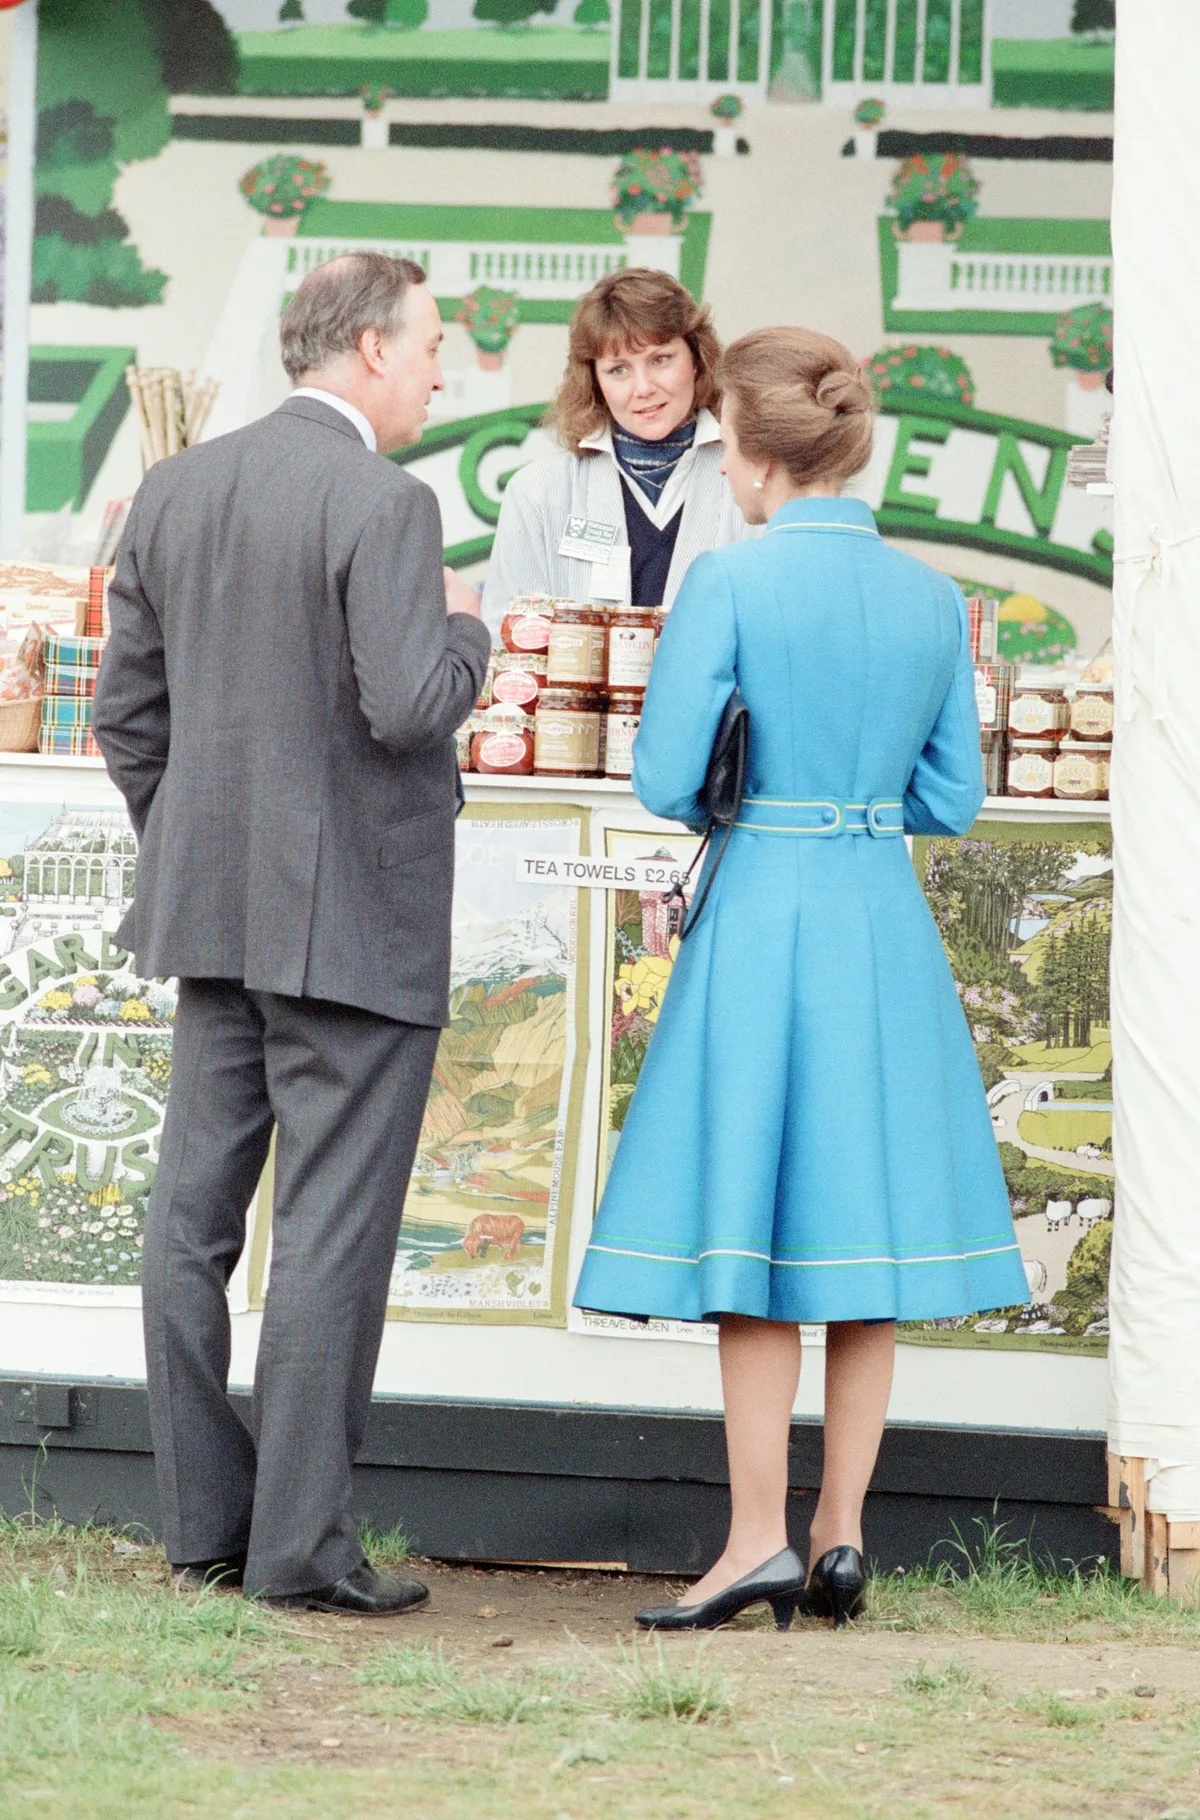 1988: Princess Anne. The Princess Royal at the Chelsea Flower Show